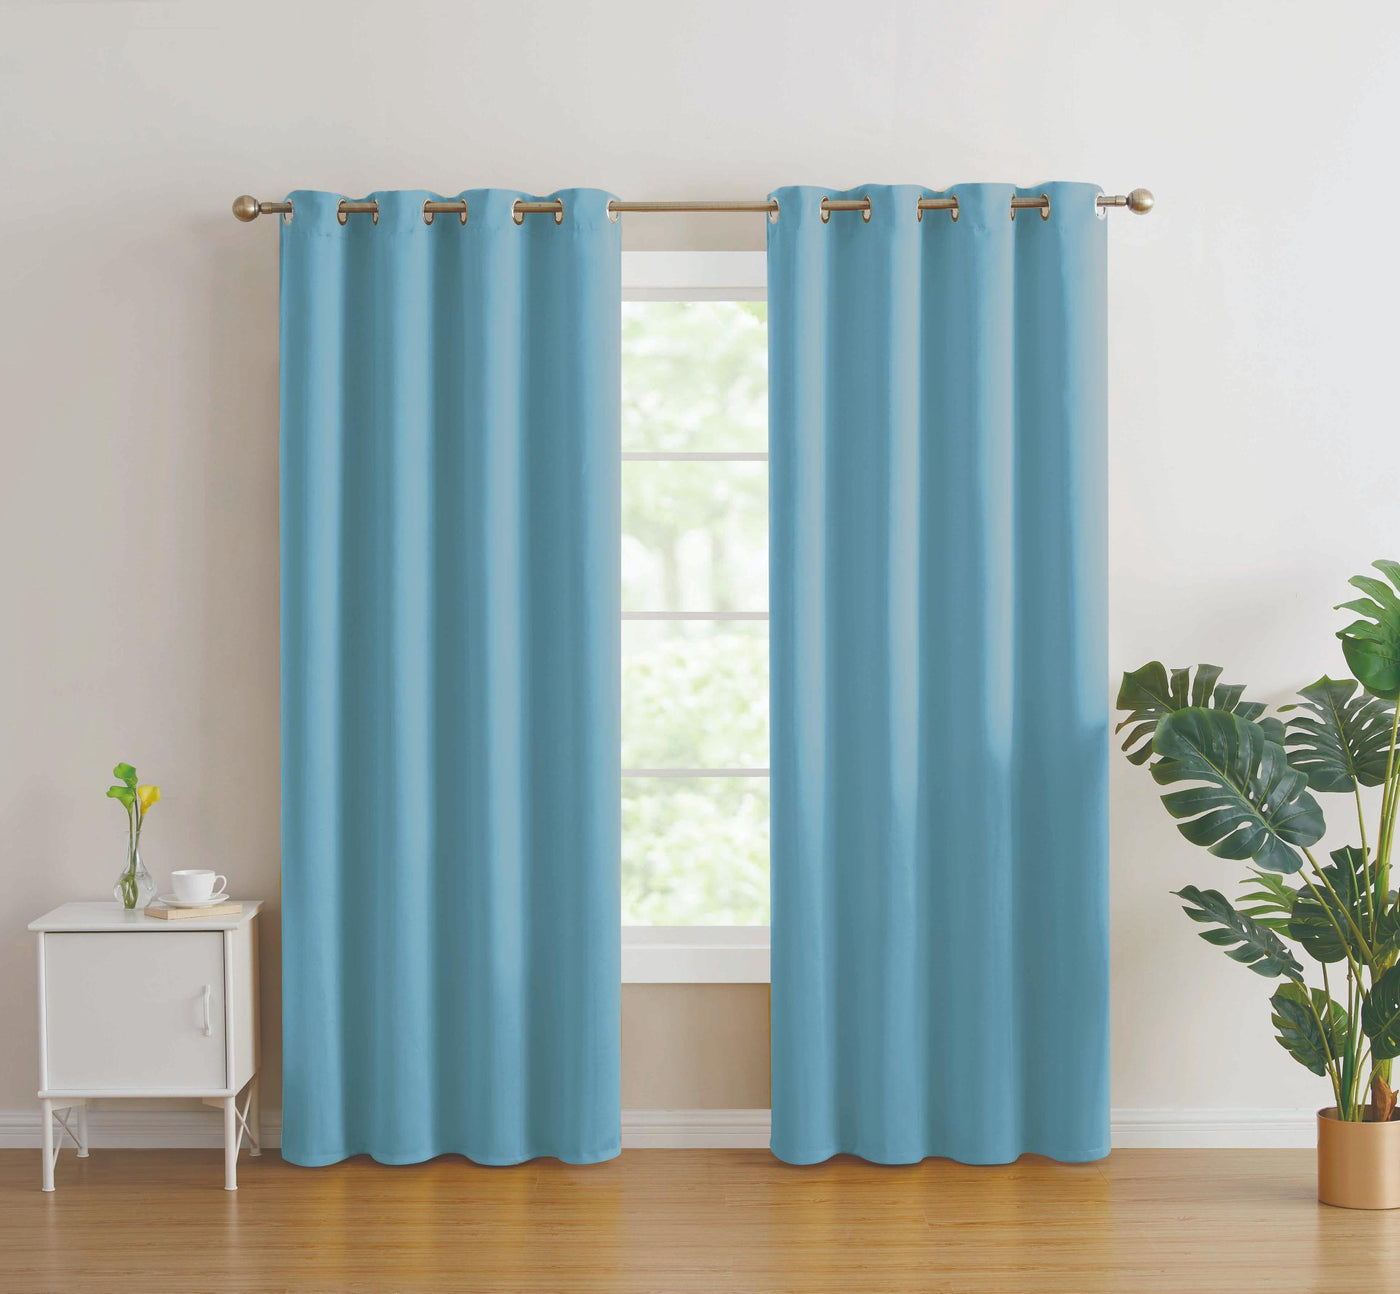 2pc Solid Grommet Thermal Insulated Window Curtain Panels Room Darkening Blackout 95"